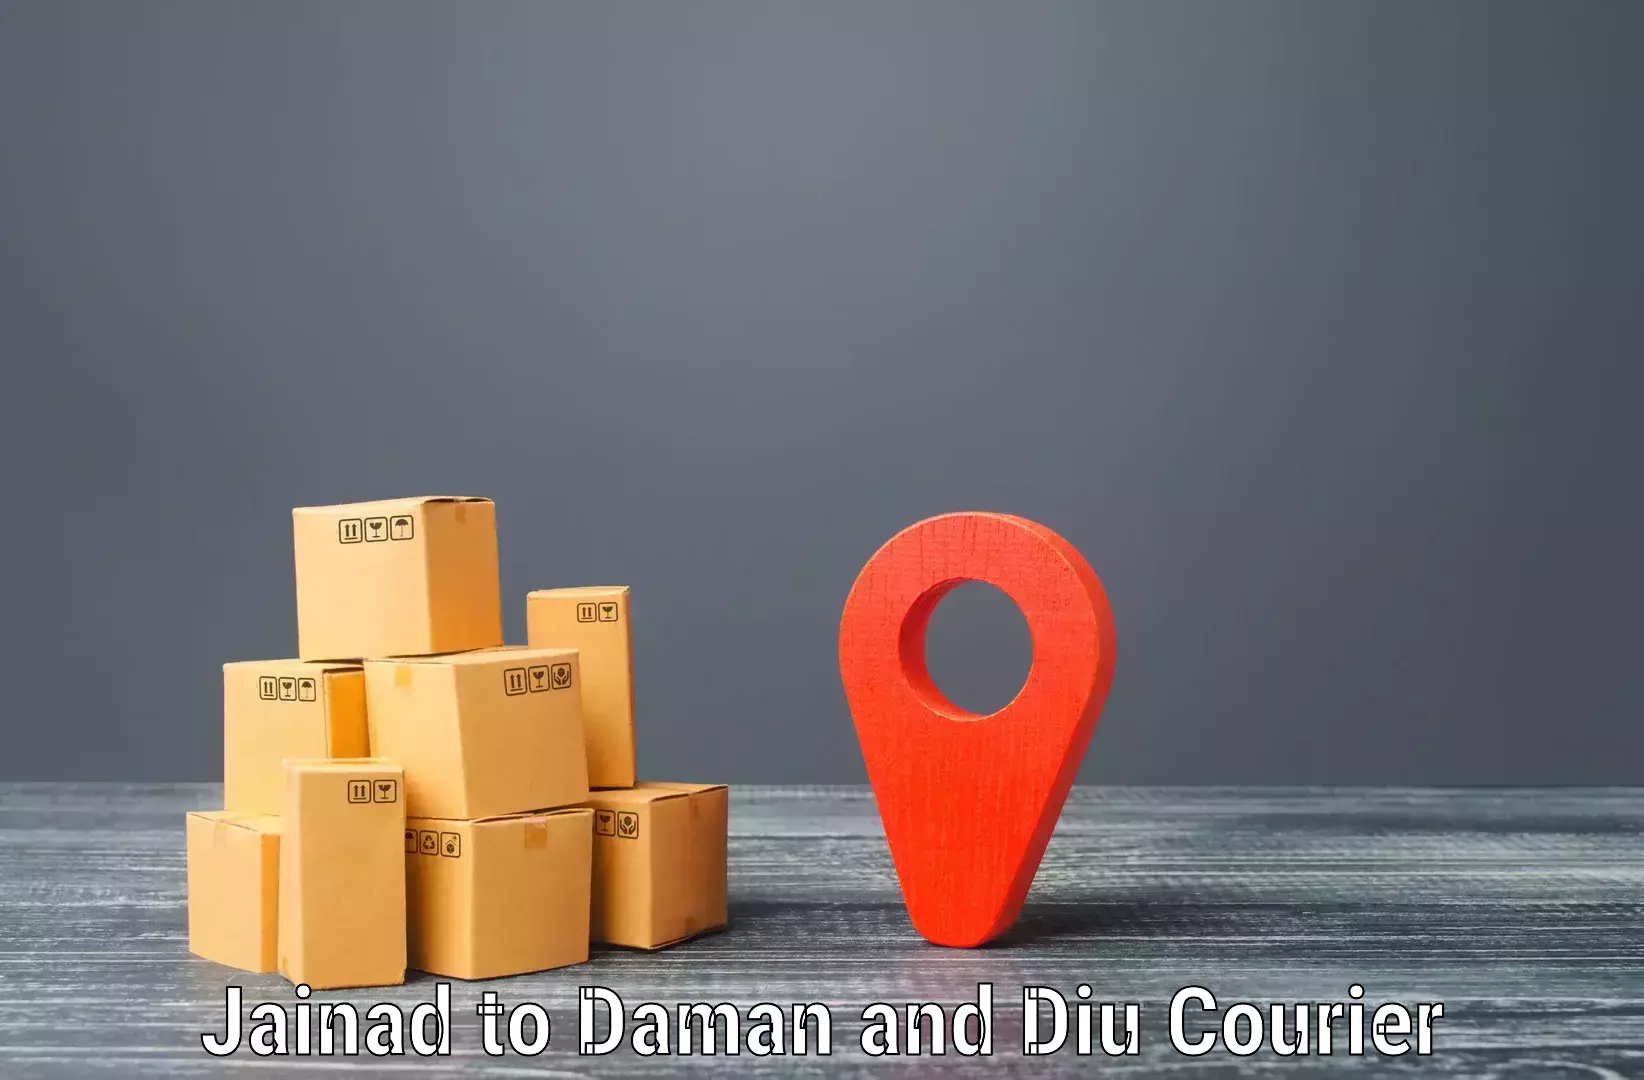 Express package delivery in Jainad to Diu